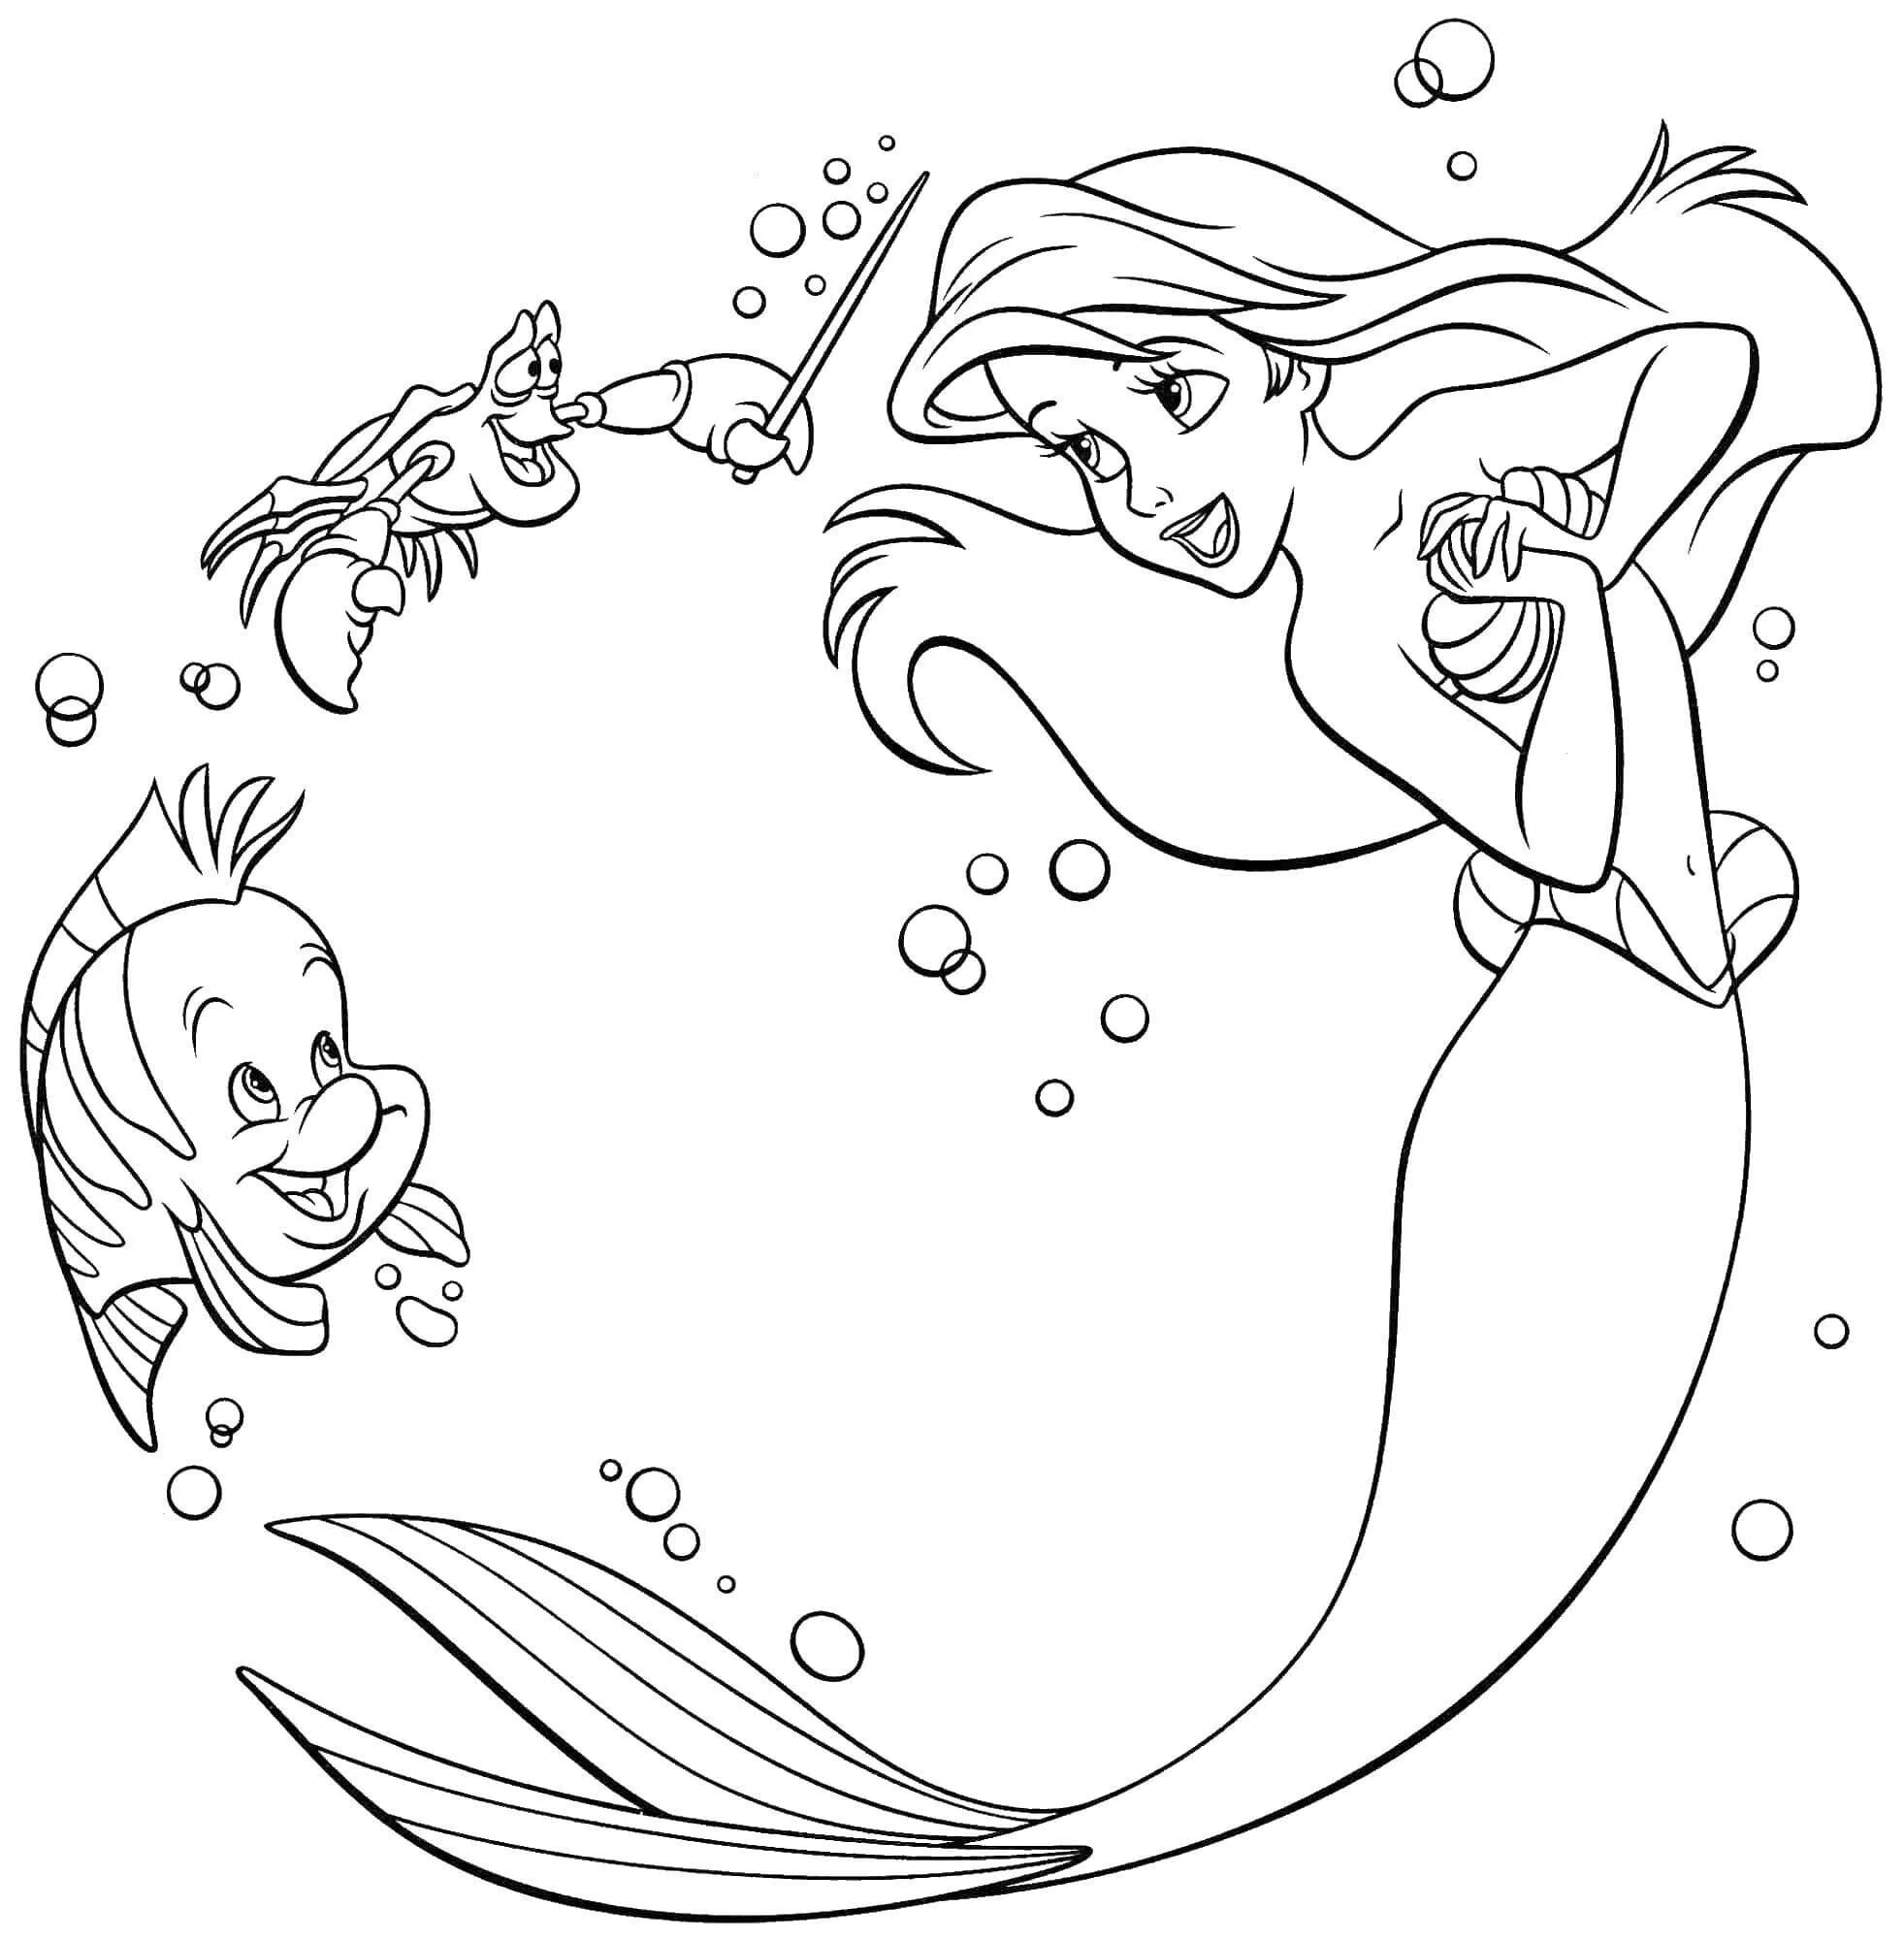 Dreamy little mermaid coloring book for girls